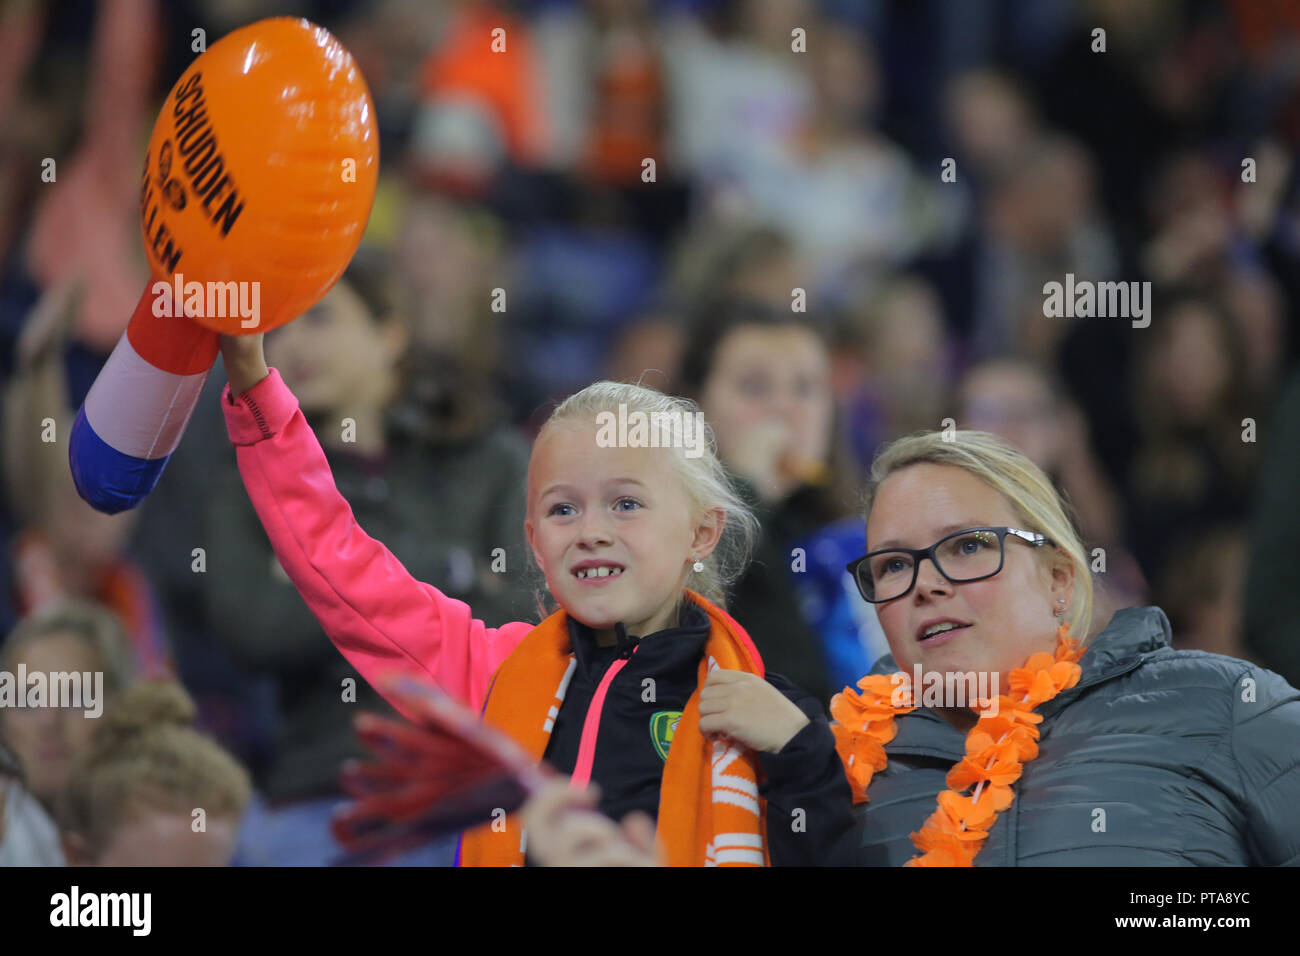 Football fans of Netherlands watch the match agains Denmark for qualification to the world cup. Stock Photo